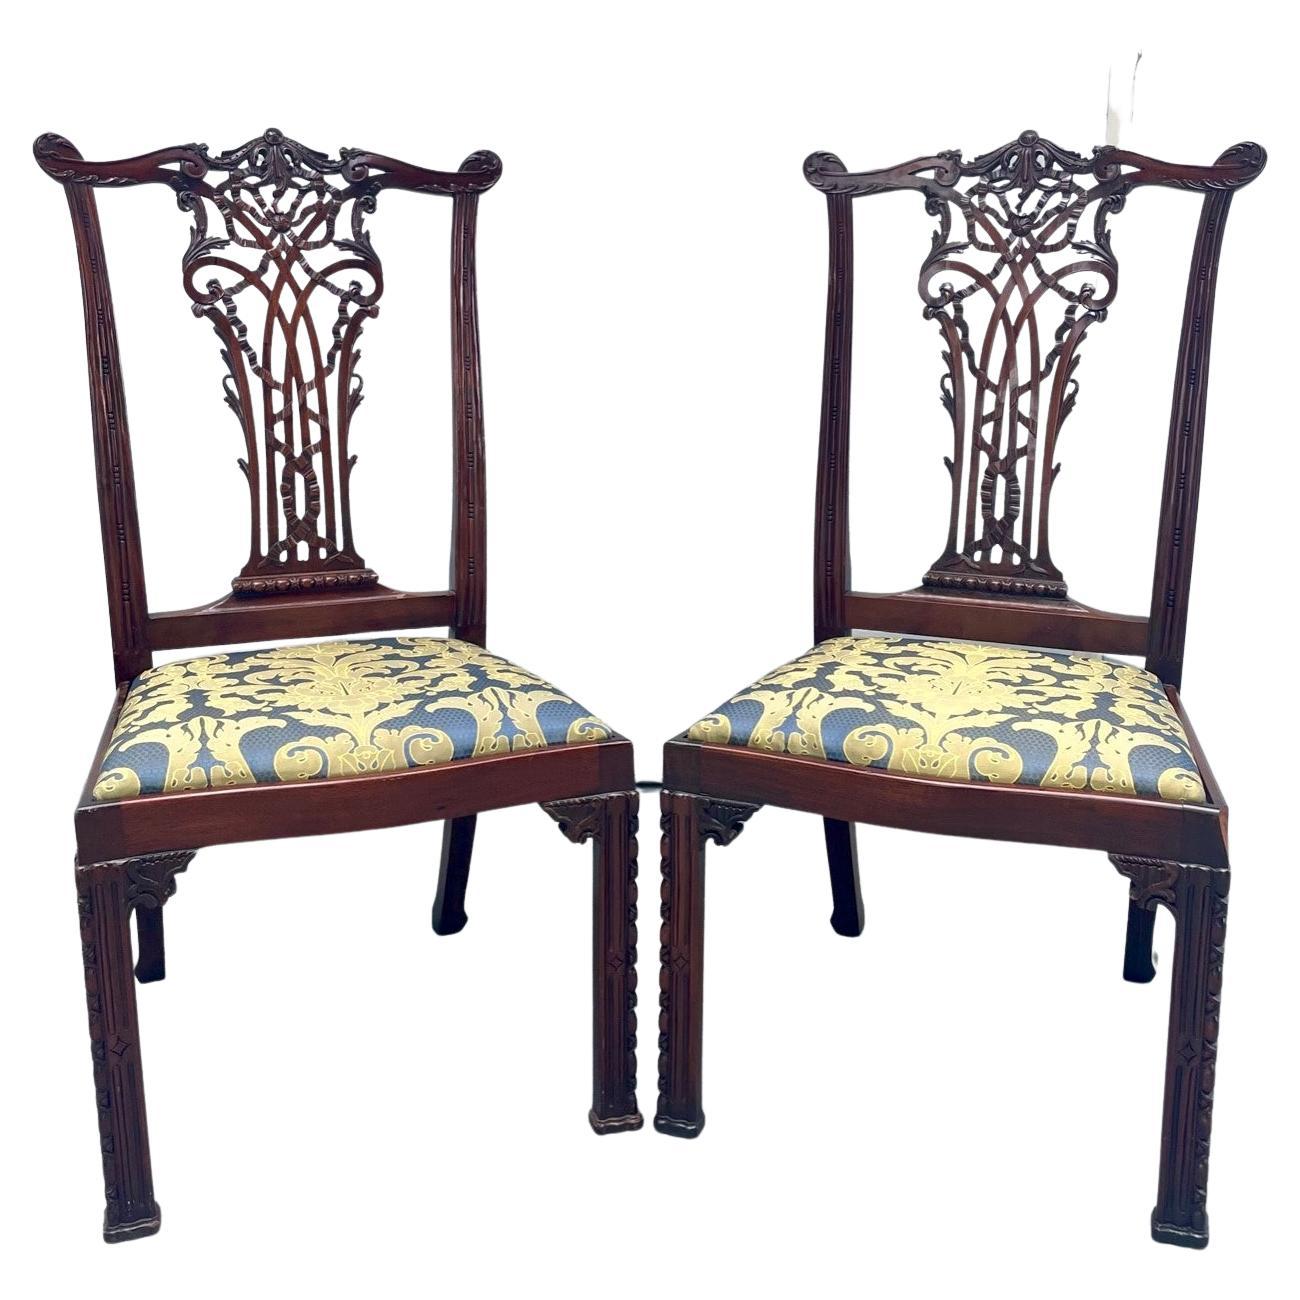 Pair of English Chippendale Mahogany side chairs, circa 1890.

Outstanding pair of marvelous carved mahogany side chairs in Classic Chippendale style. They are crafted after one of the greatest English furniture makers. A shaped top rail above the